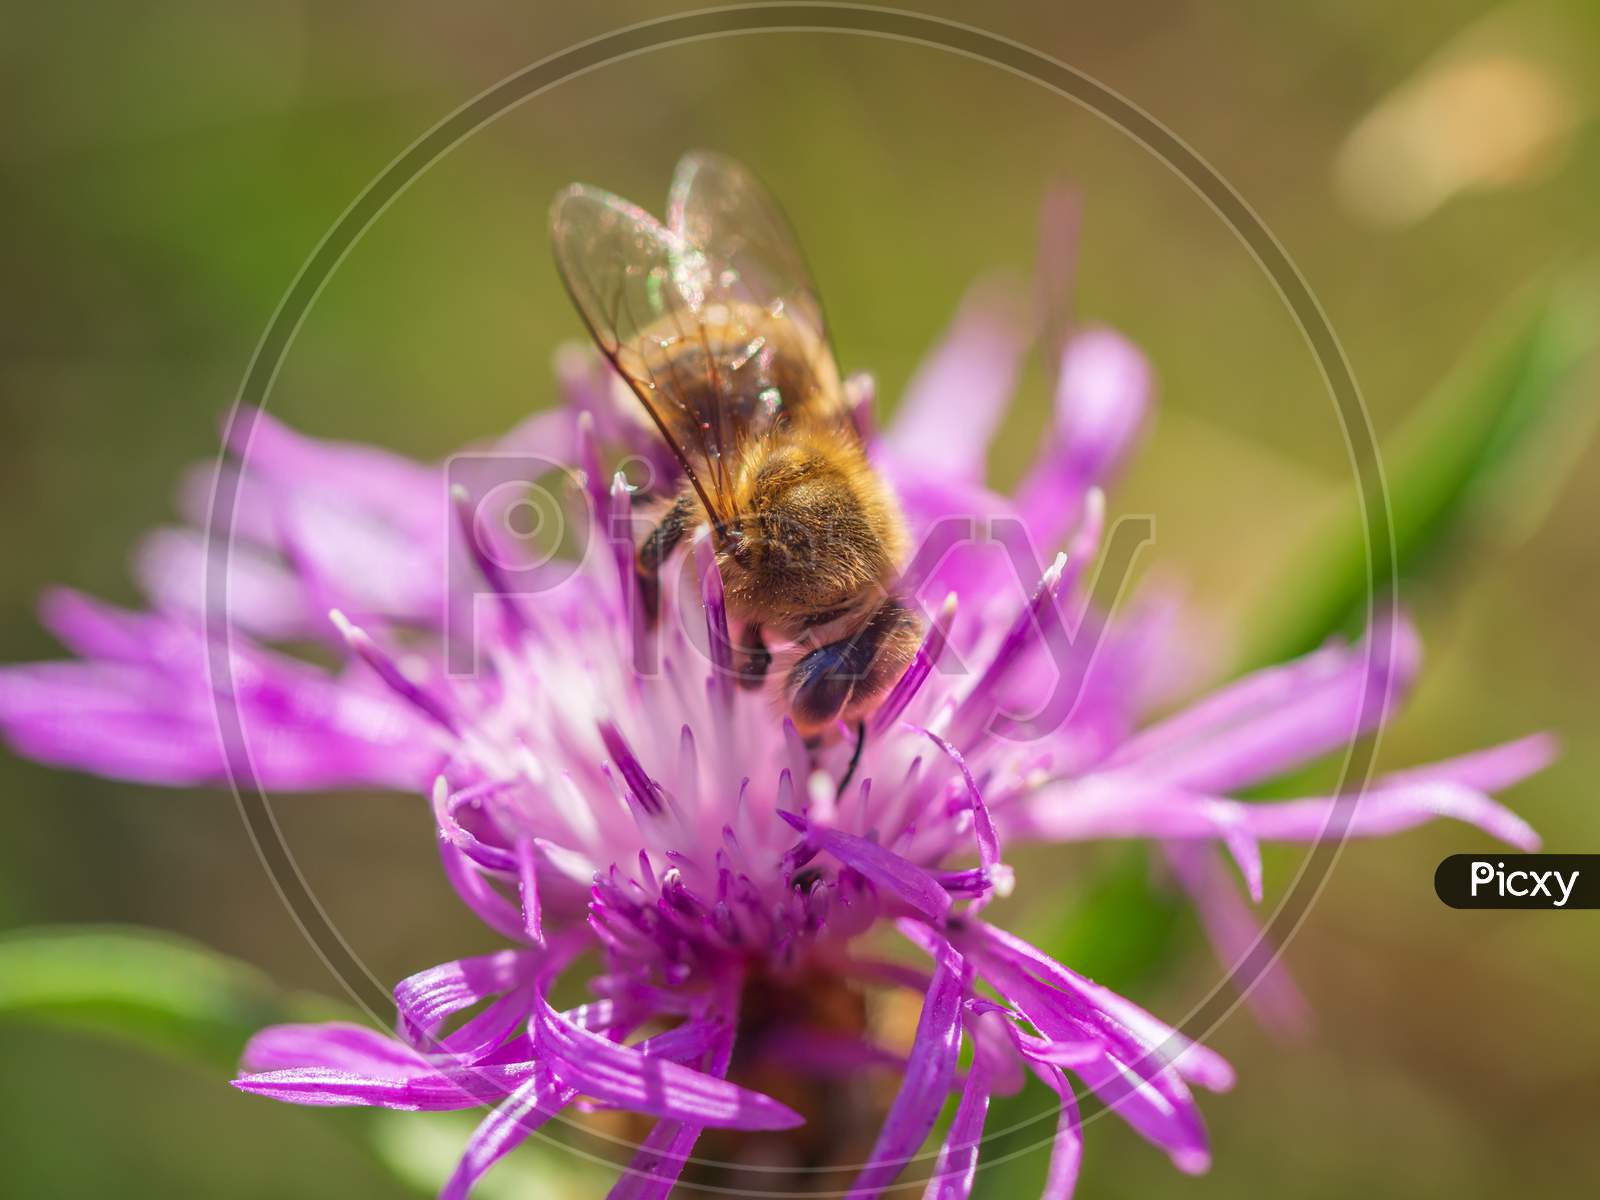 Close-Up Of Western Honey Bee Extracting Nectar From Brown Knapweed Flower.